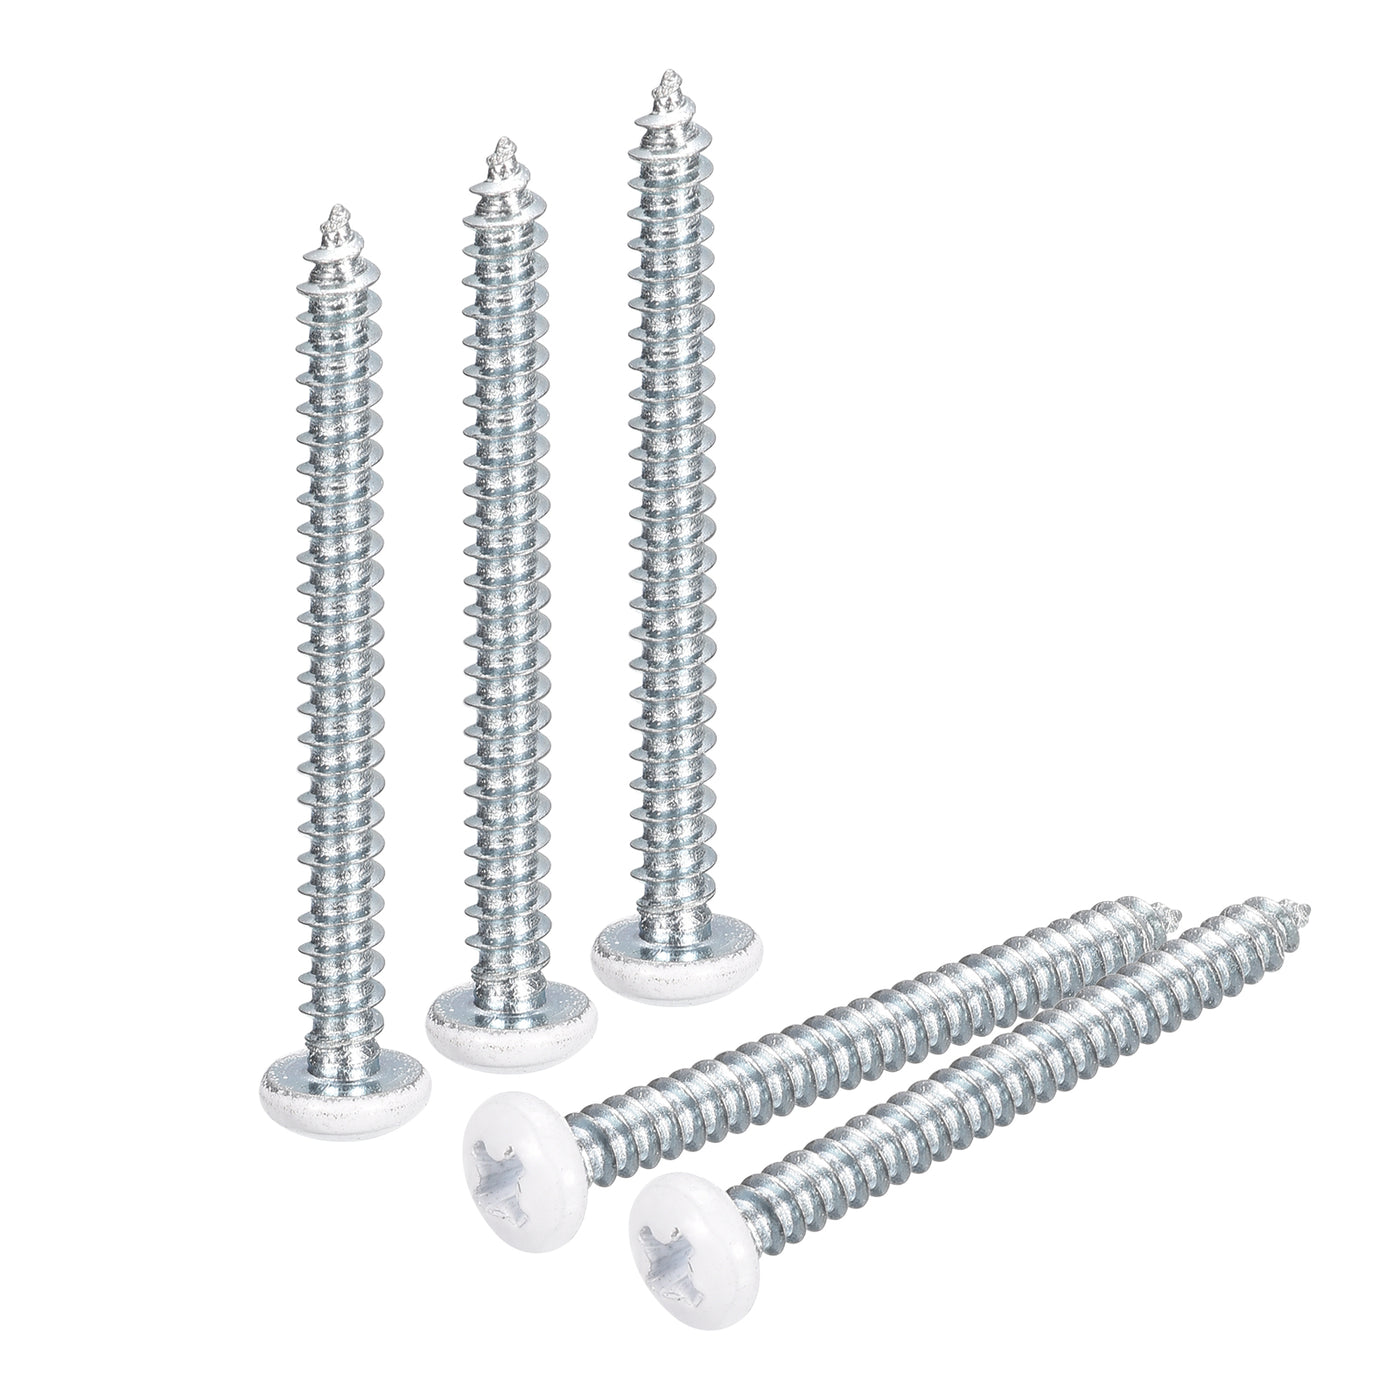 uxcell Uxcell ST3.5x35mm White Screws Self Tapping Screws, 50pcs Pan Head Phillips Screws